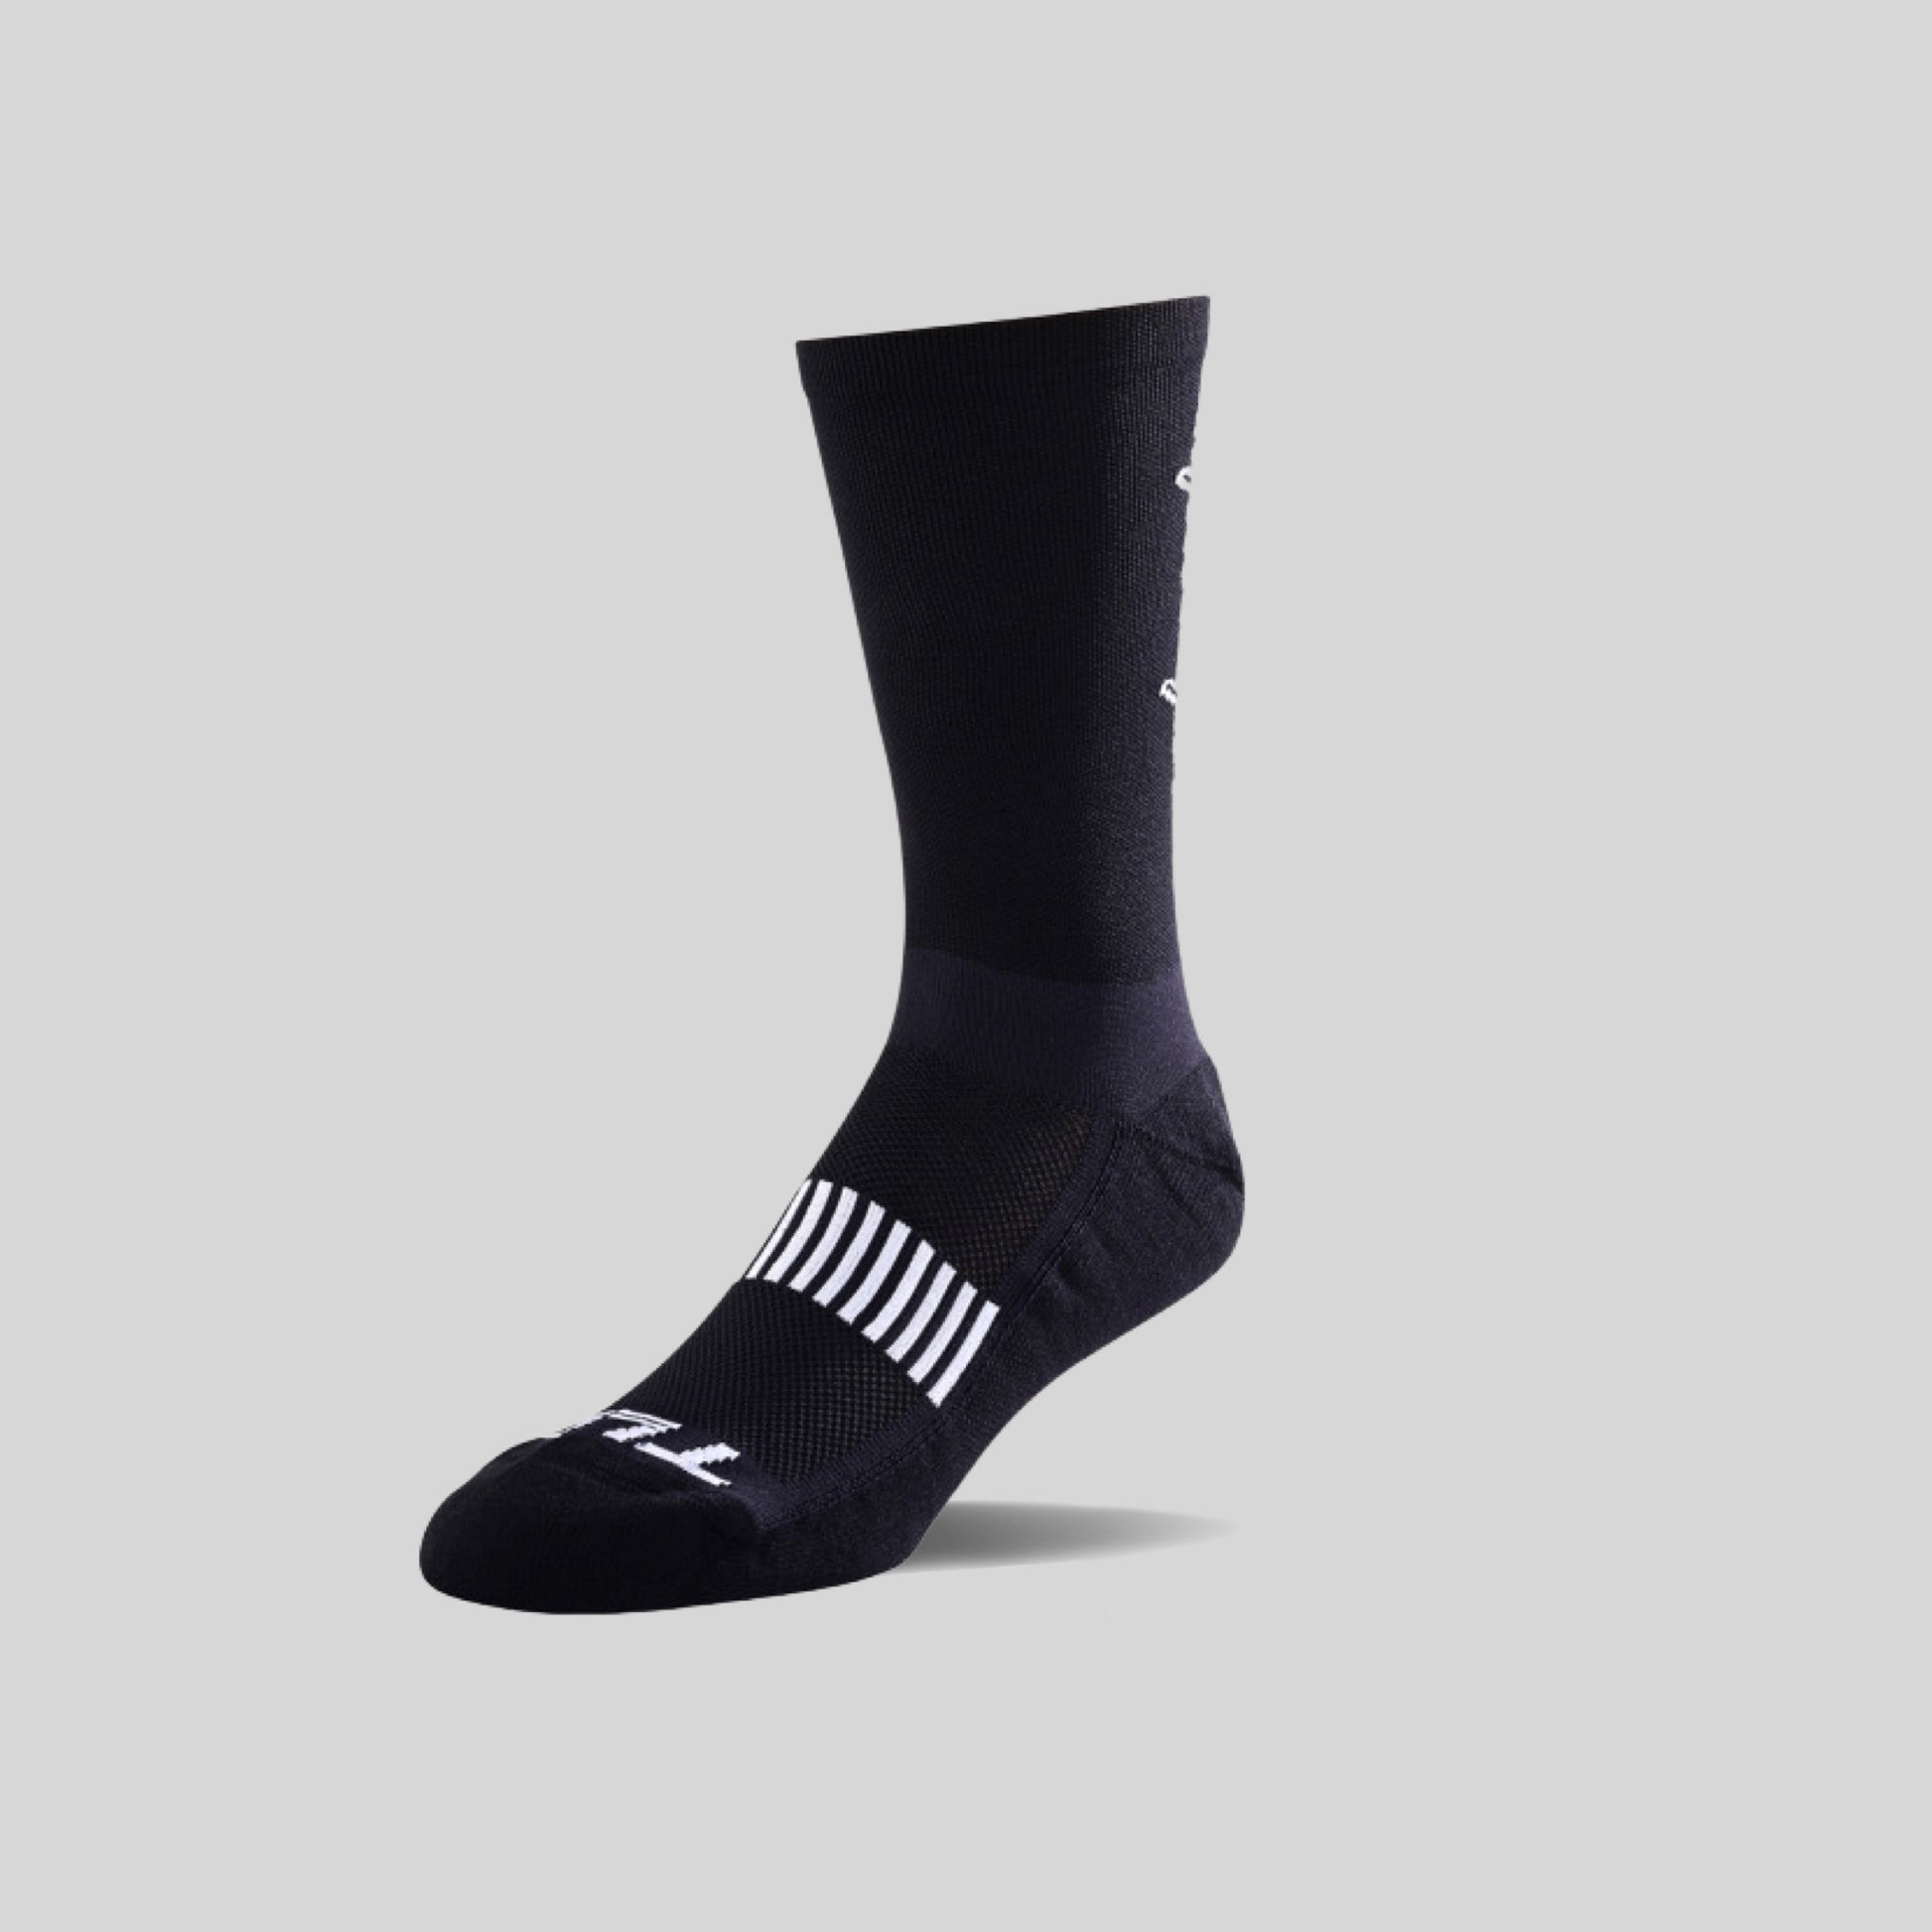 Troy Lee Designs Performance Signature Socks Black from Ascender Cycling Club Zürich Switzerland Side View